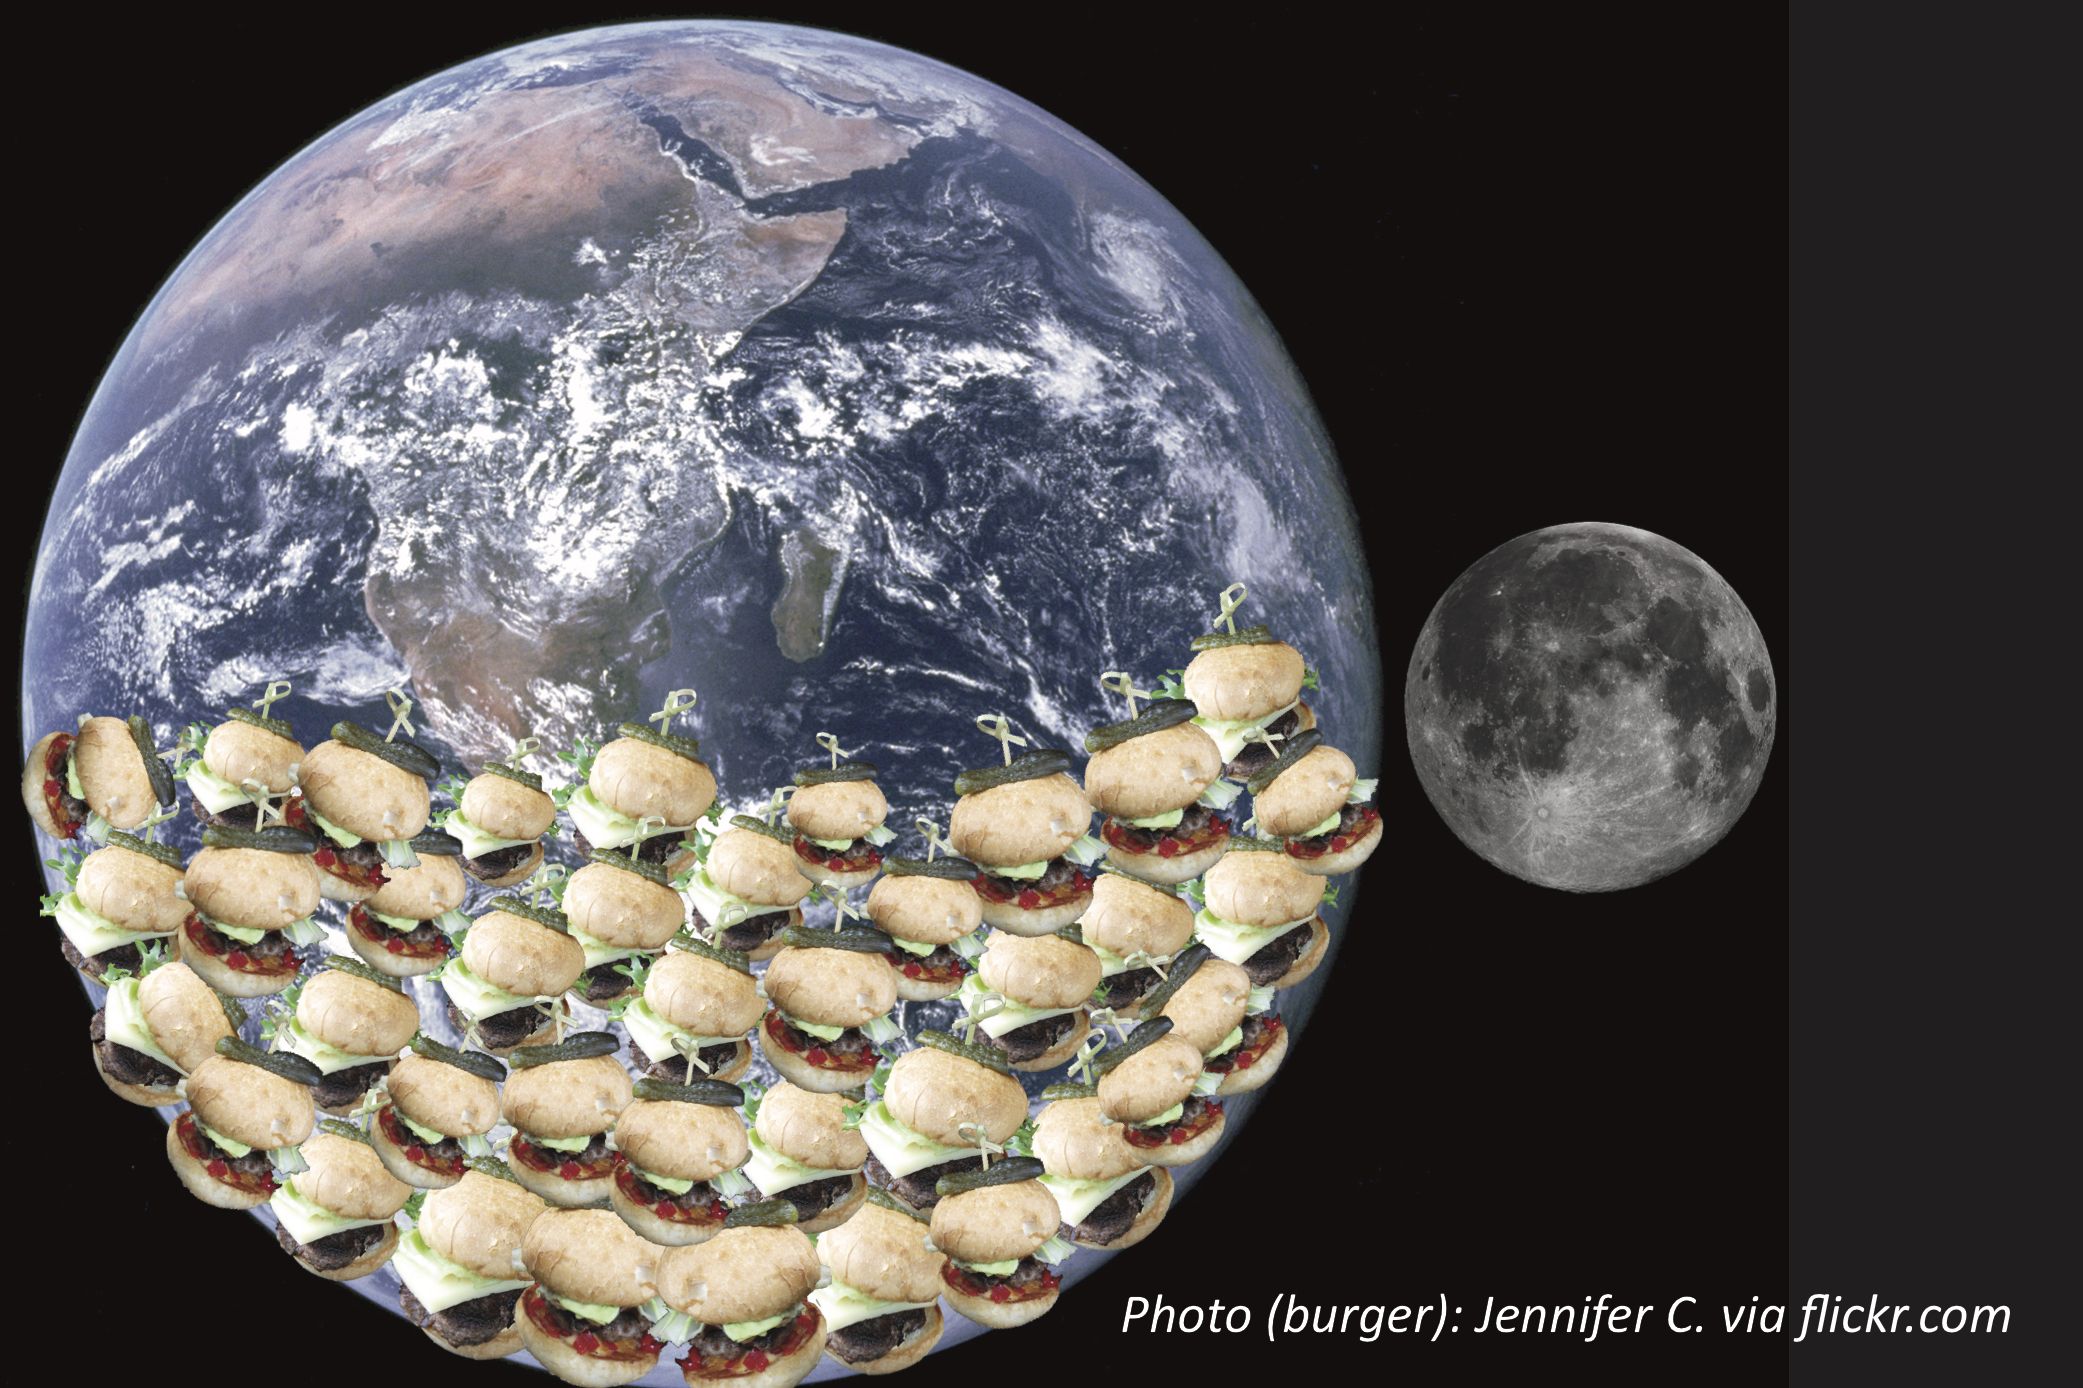 How Many Burgers Could Fit Inside Earth?